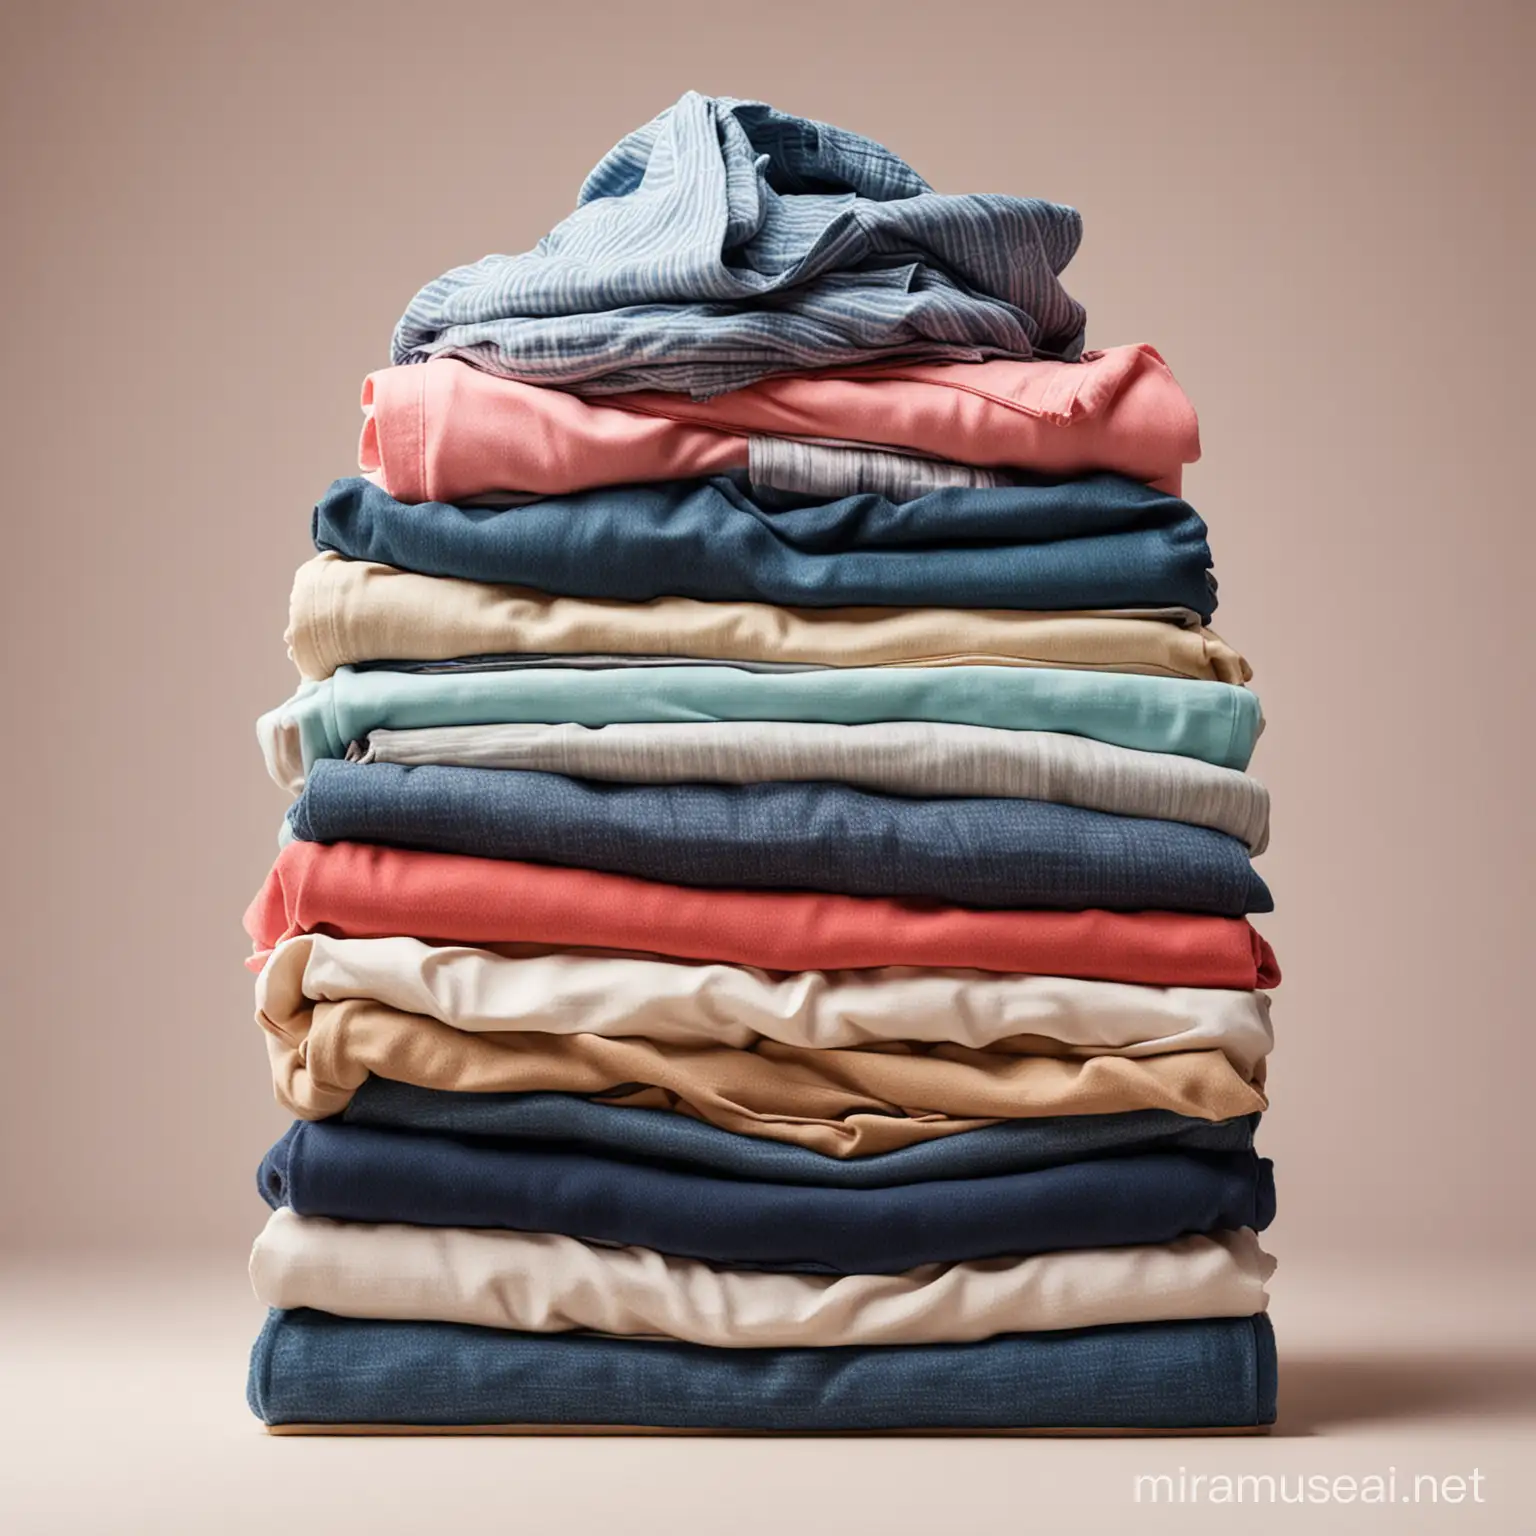 Neatly Stacked Clothes on Isolated Background